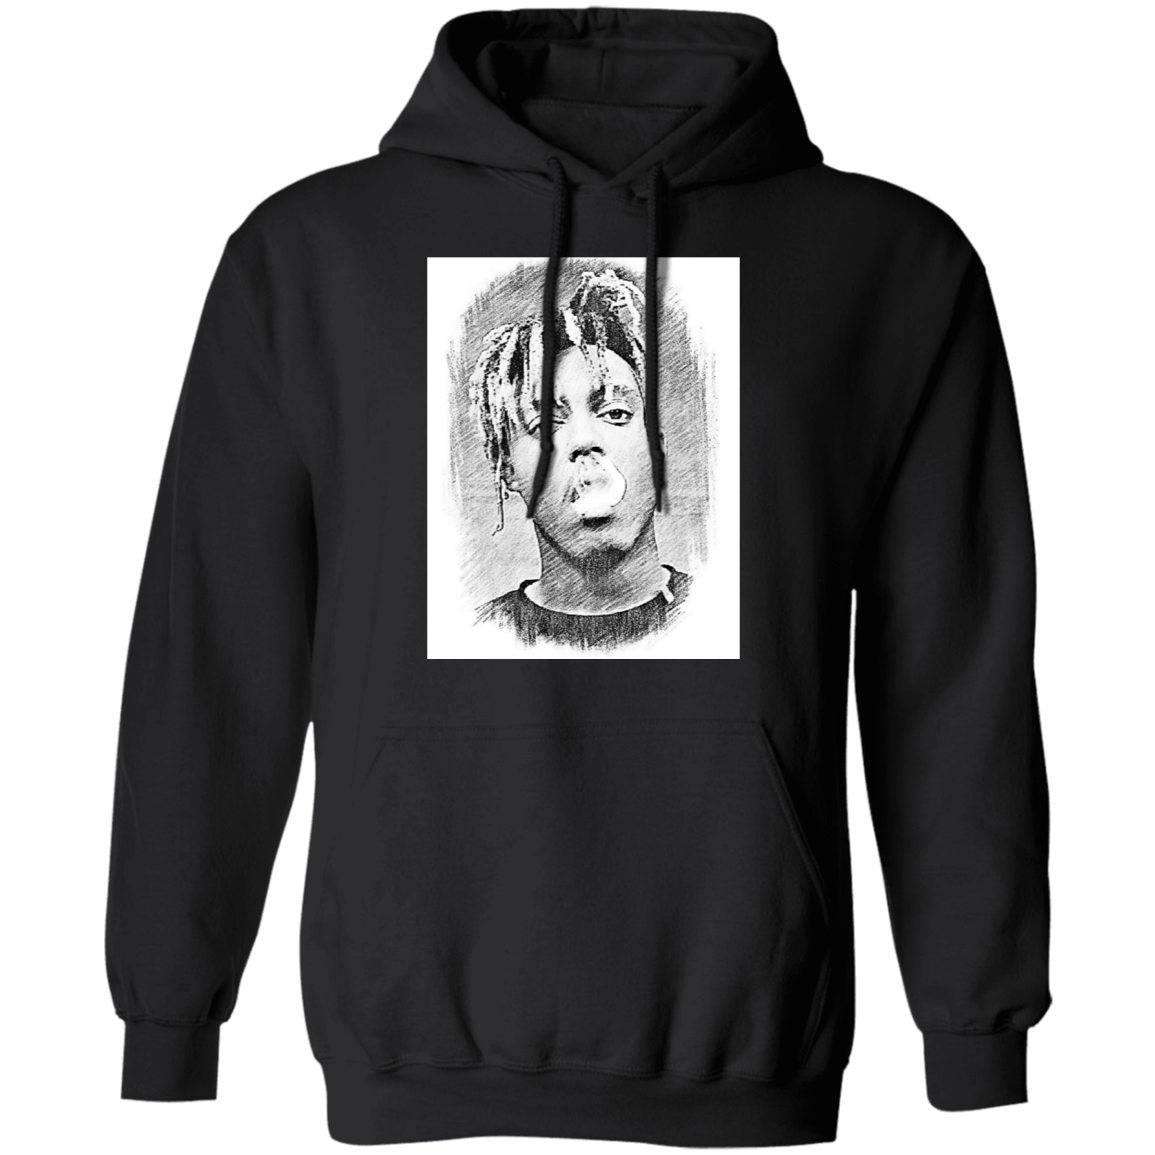 (front) juice wrld is shown smoking on the front of a black hoodie